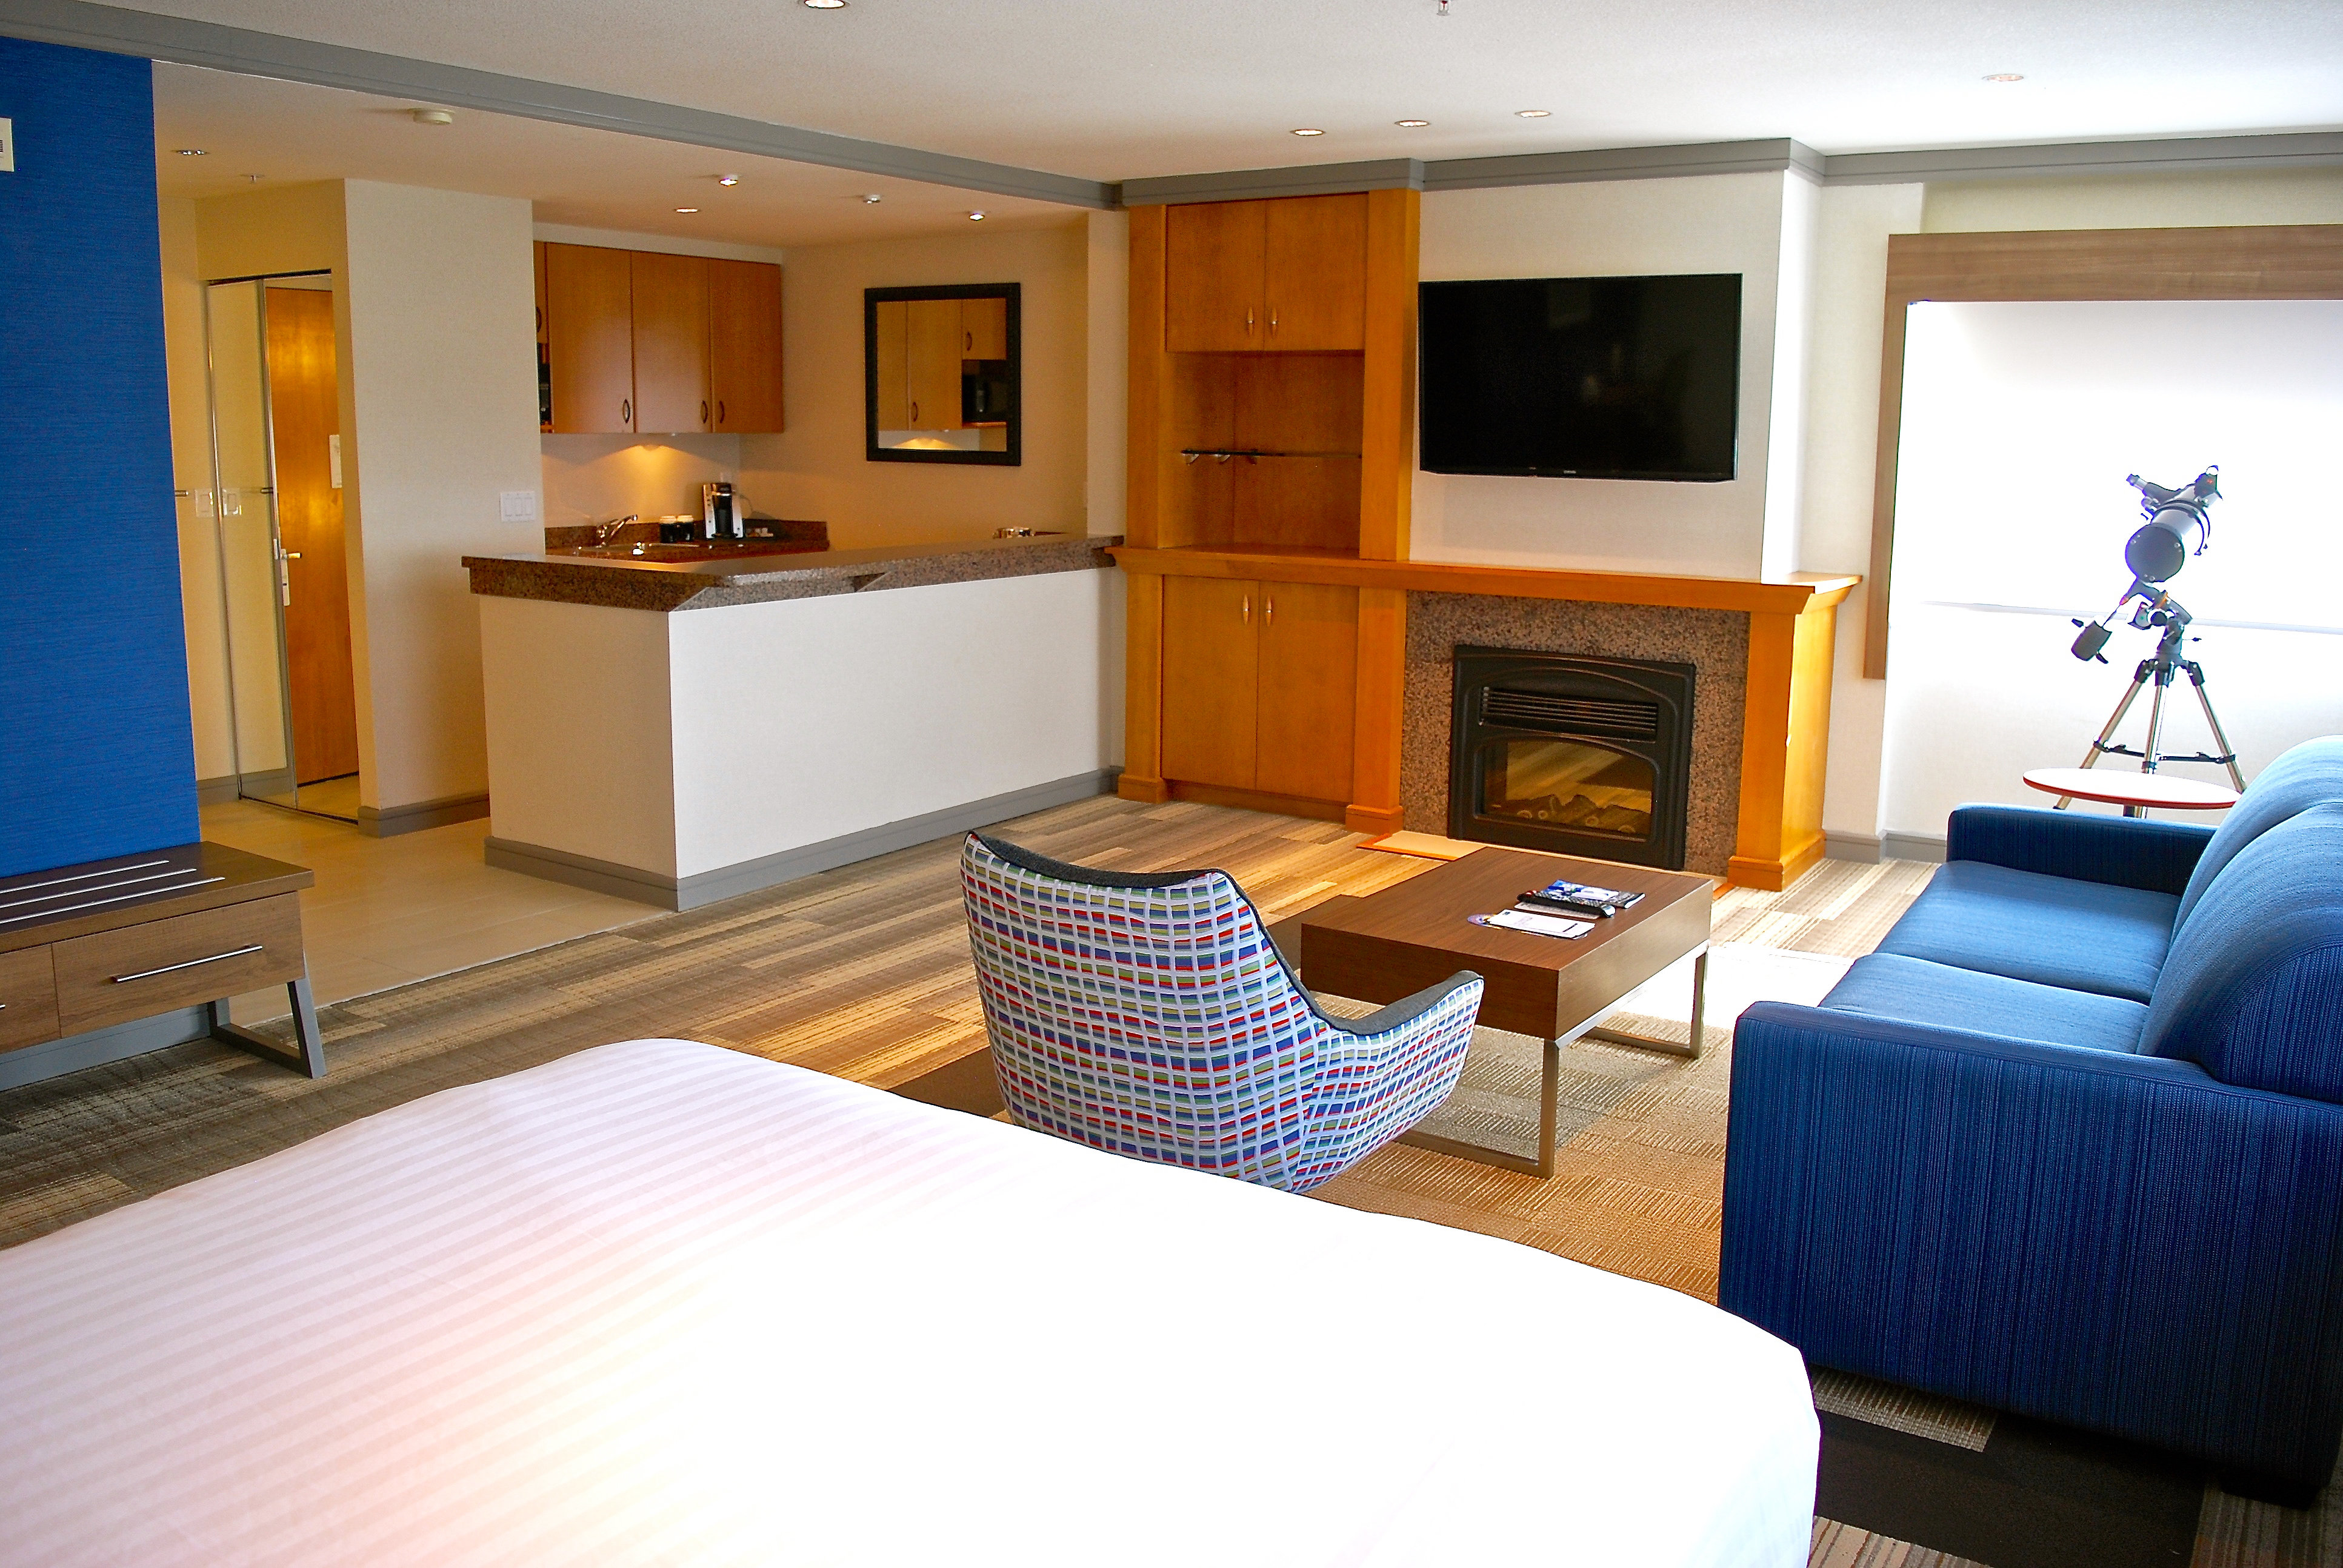 Treat yourself to a rewarding stay in our Malaspina Suite.